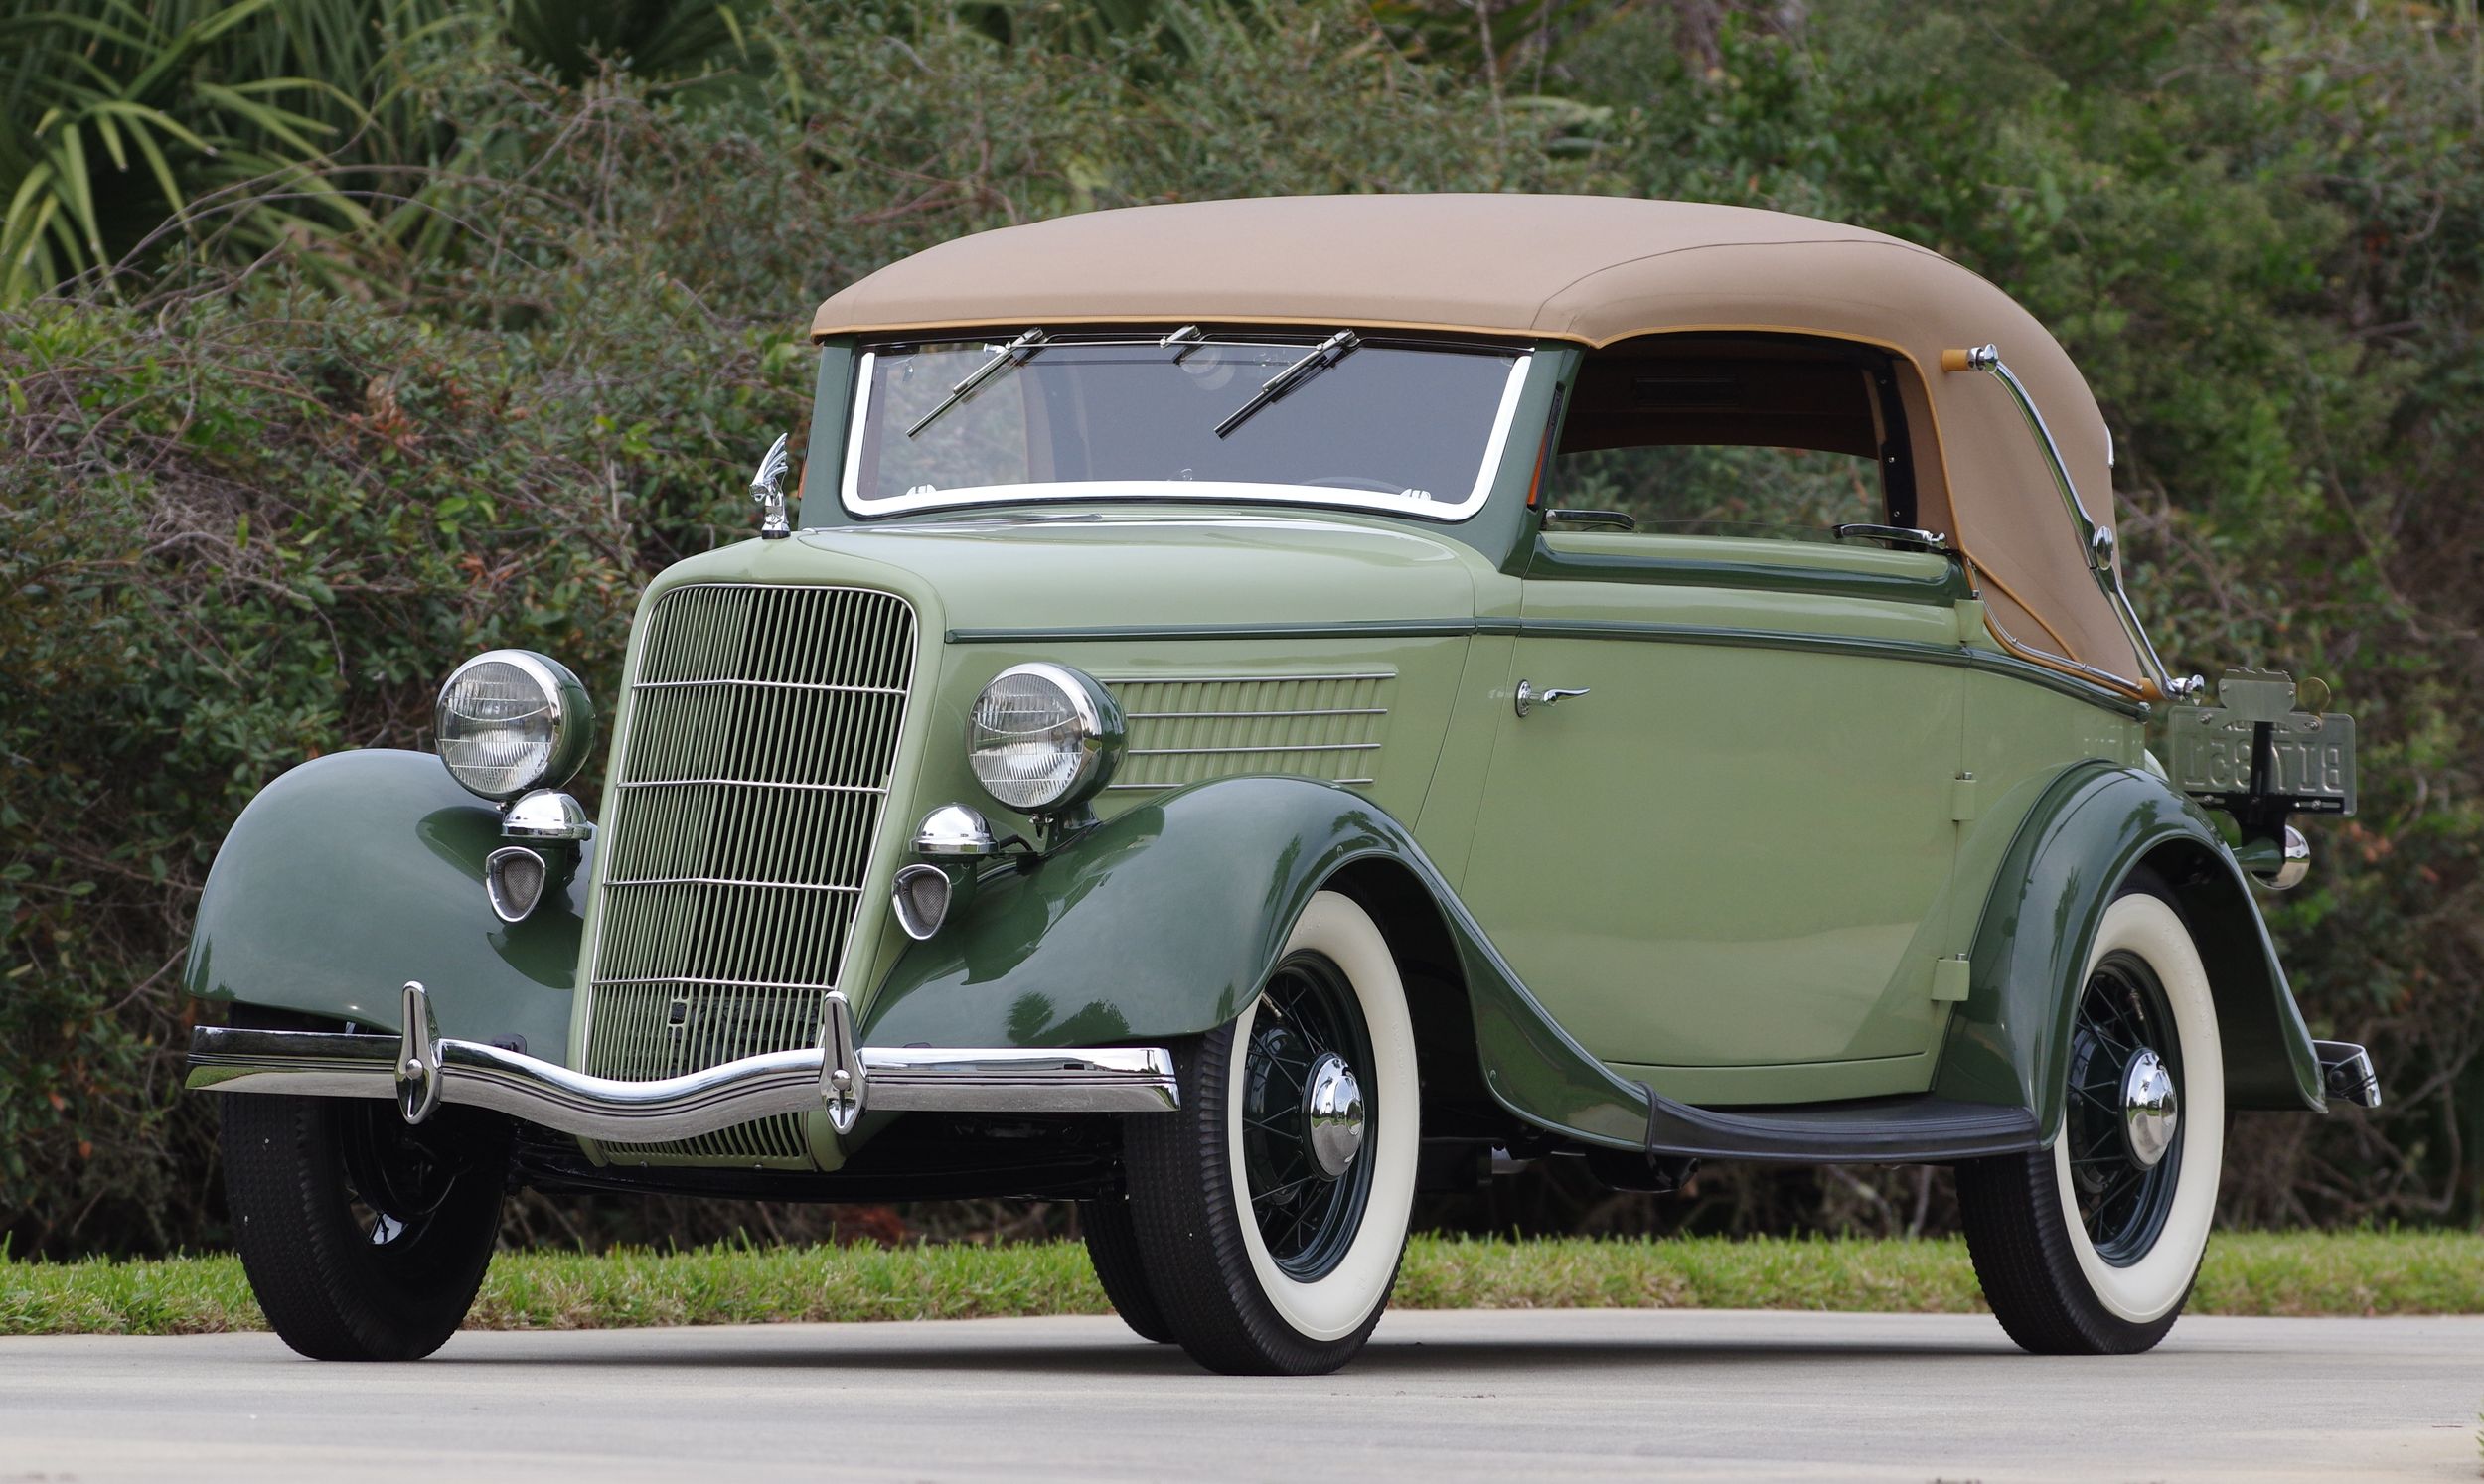 Edsel's masterpiece – designed by Edsel Ford, | Hemmings Daily